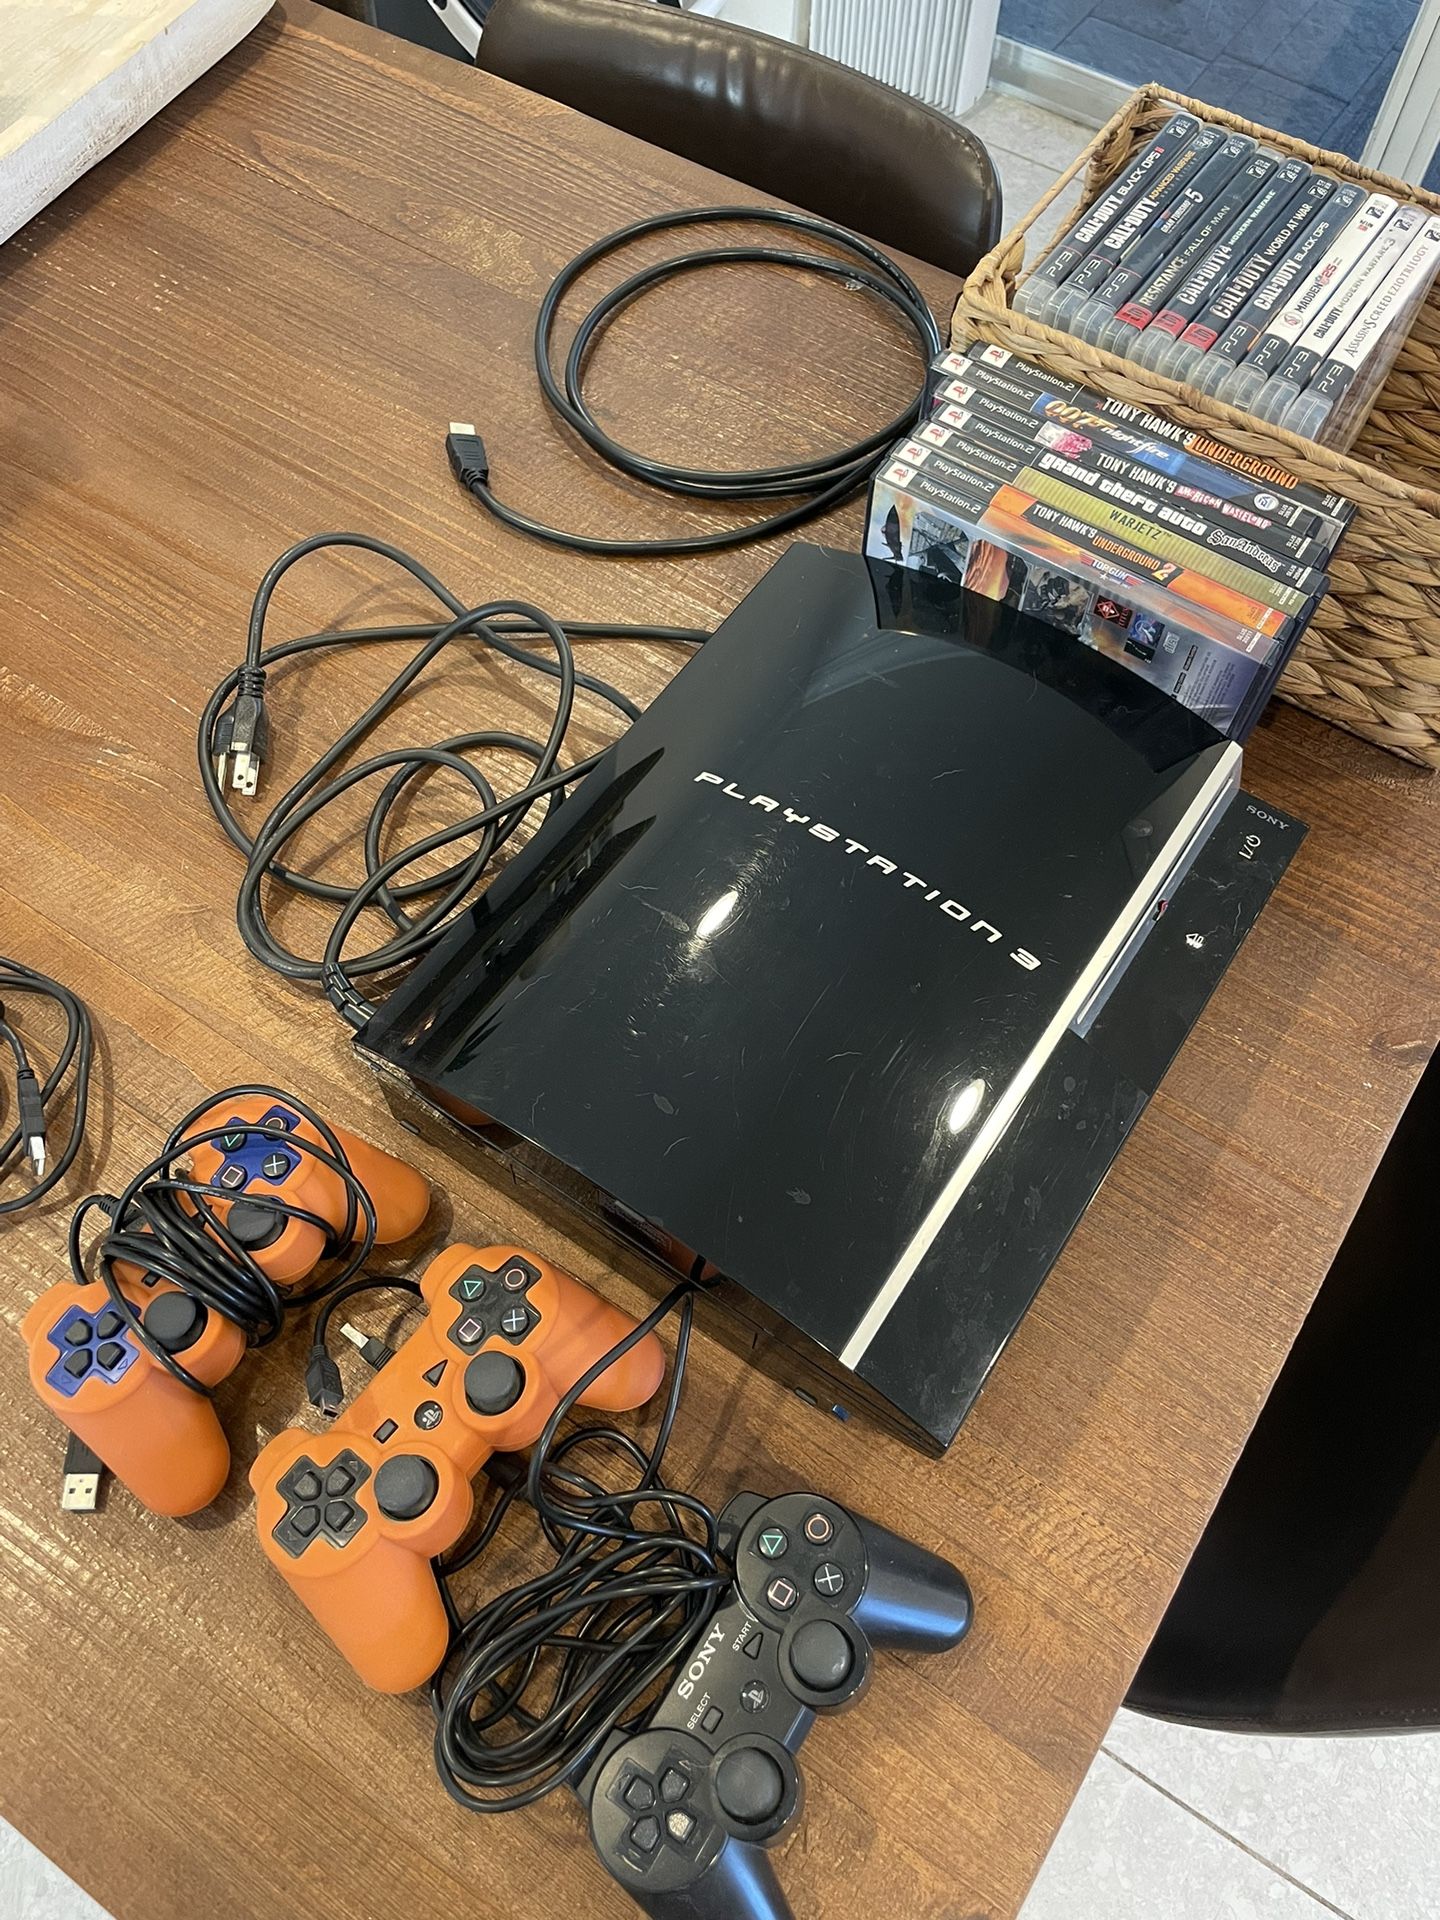 PS3, Controllers And Games For Sale!!!